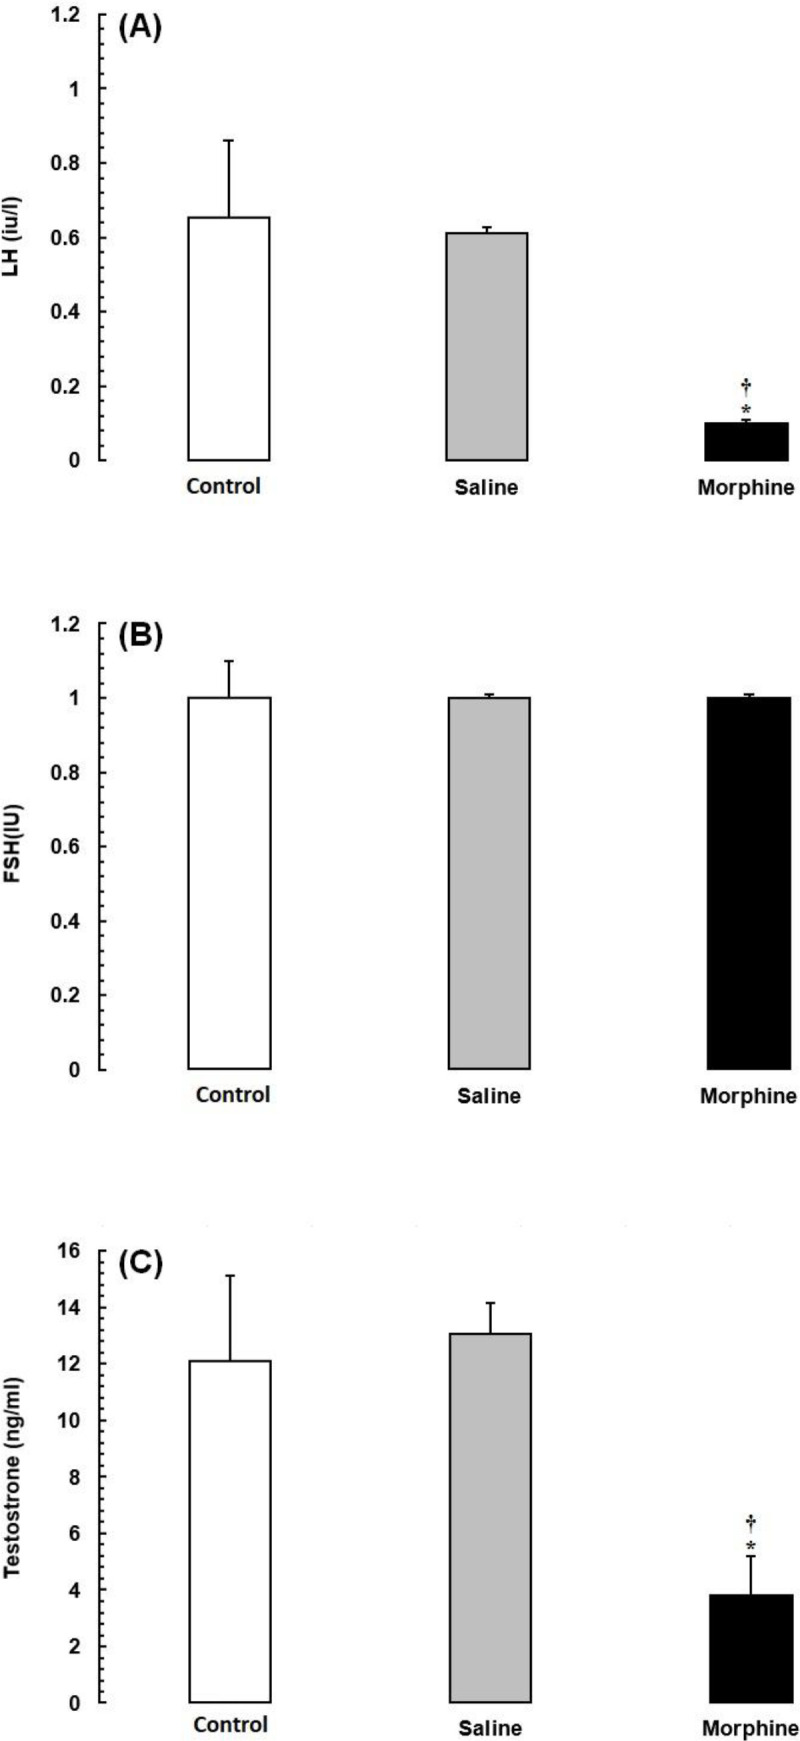 Effects of morphine on serum reproductive hormone levels in Wistar rats. Data are expressed as the mean ± SEM; *Significant decrease of the hormone level in the morphine group compared with the saline and control groups (P < 0.05).